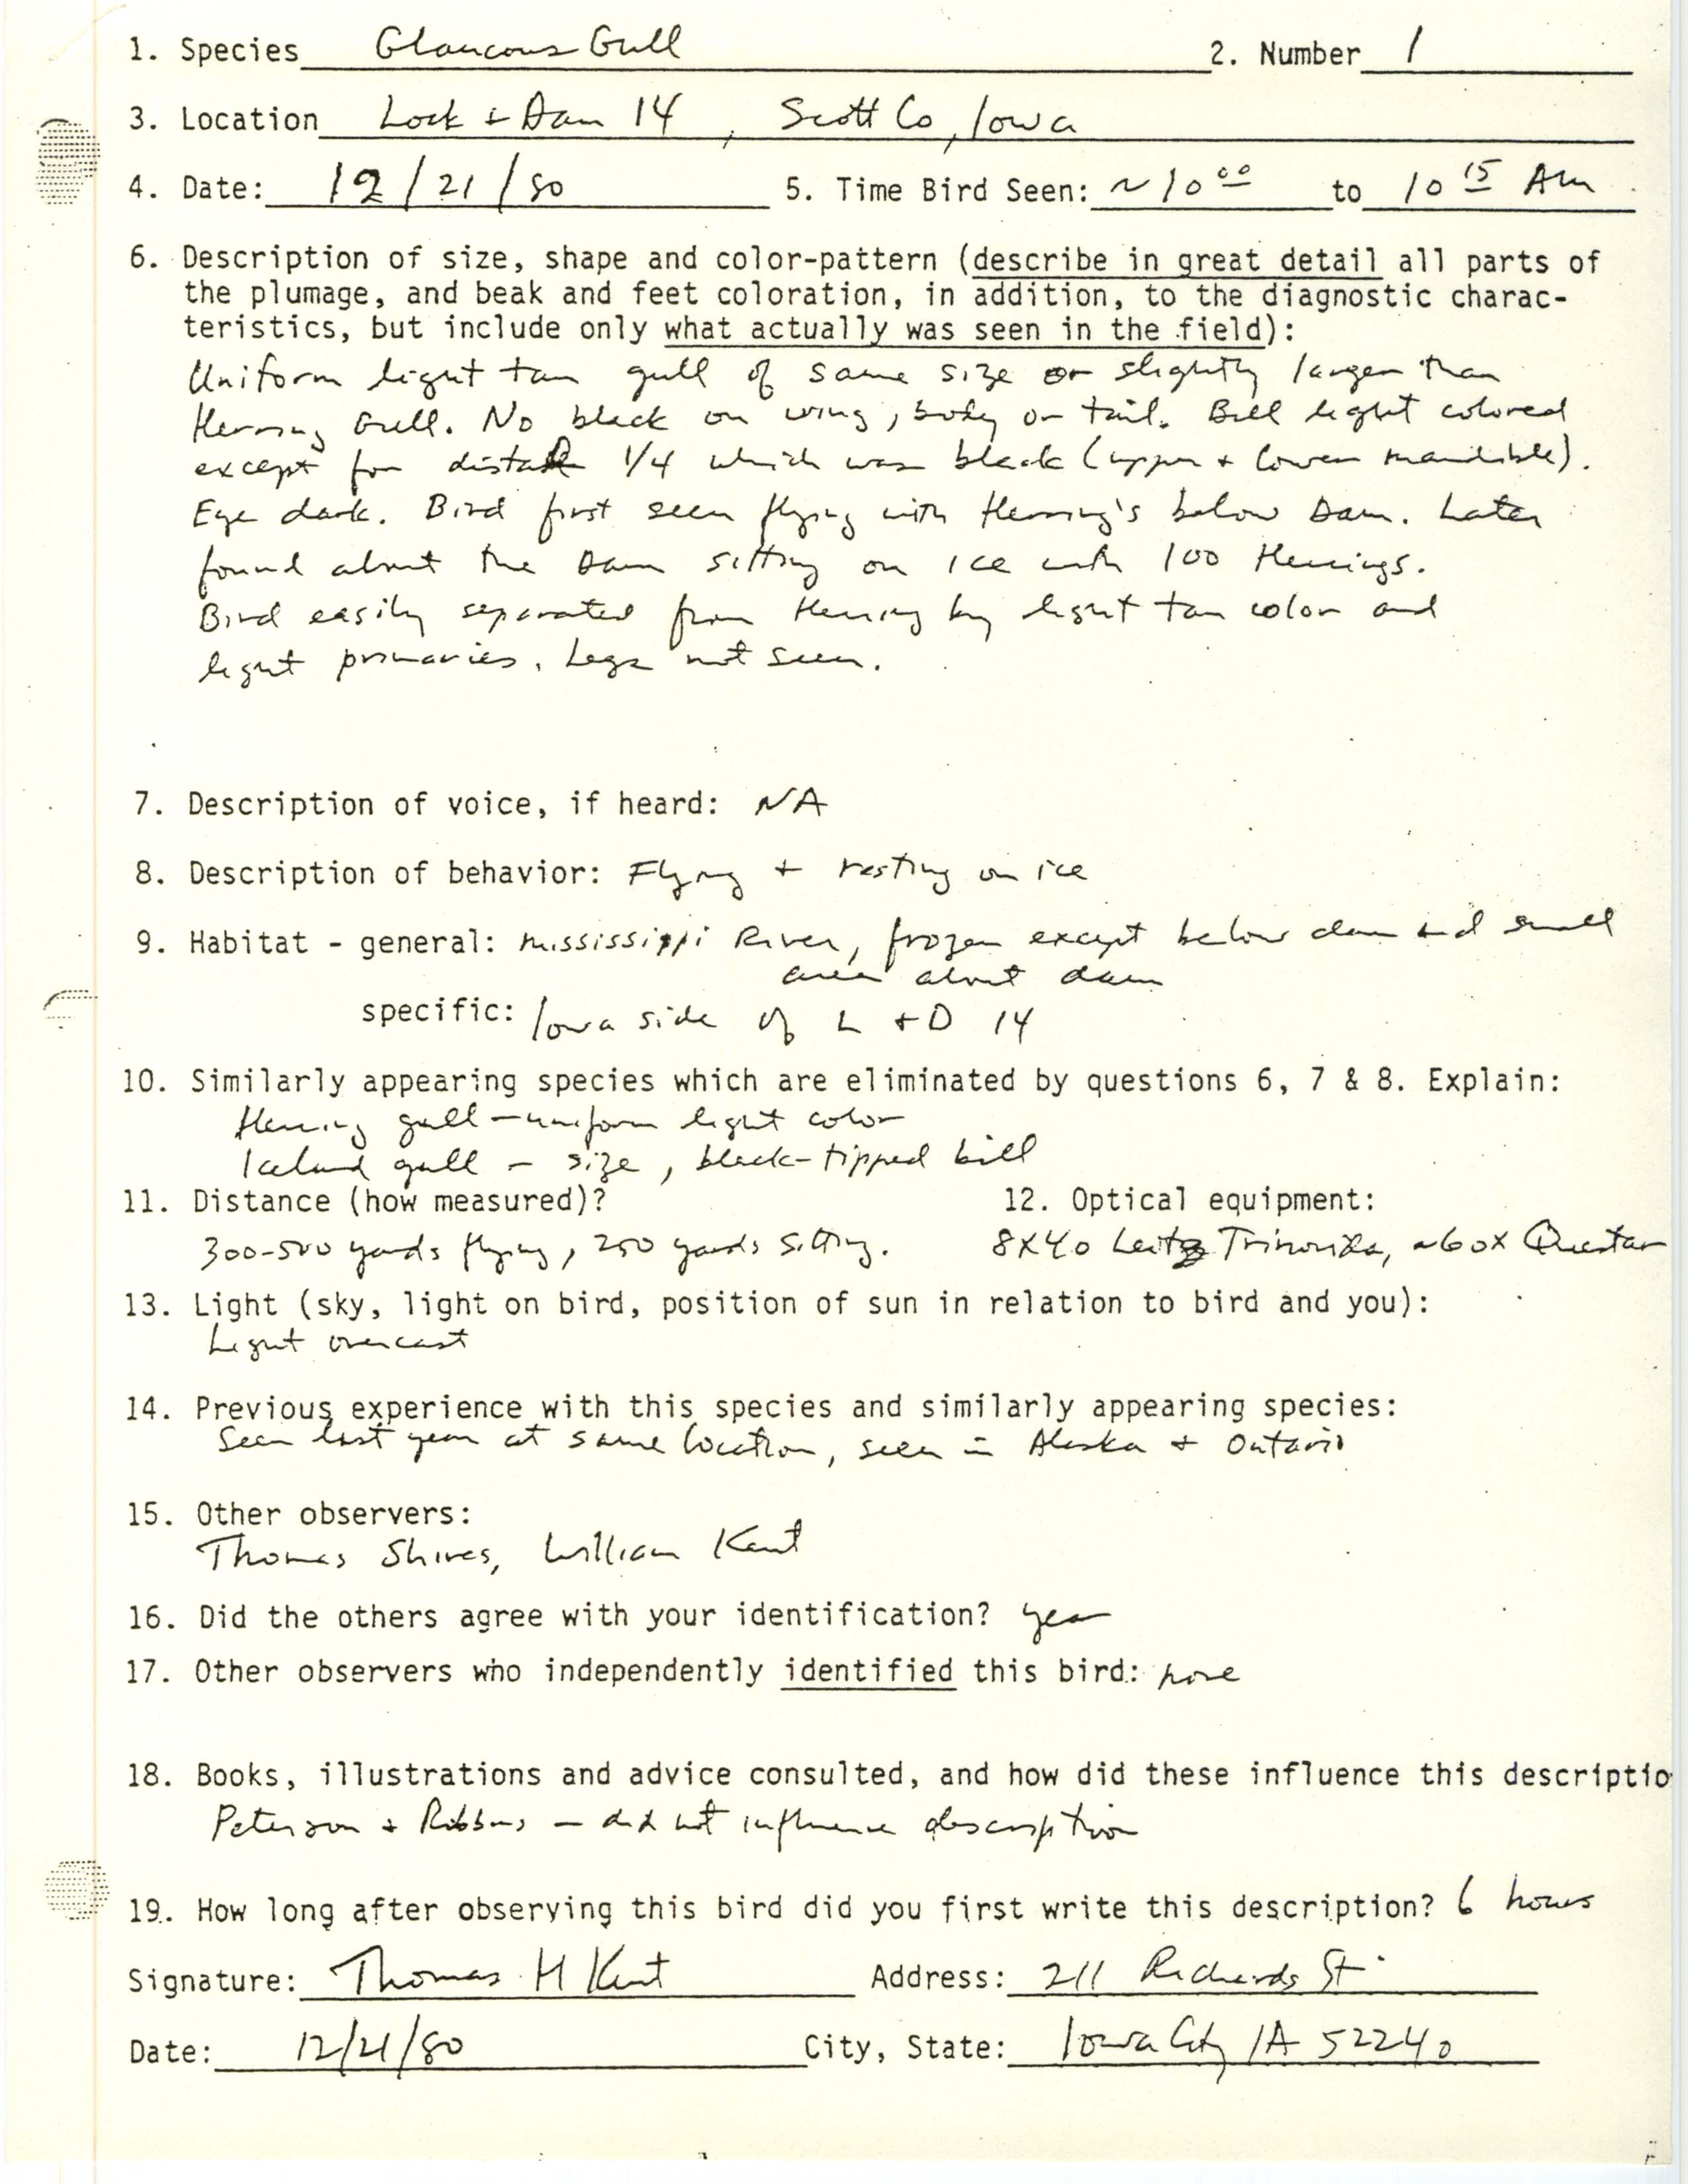 Rare bird documentation form for Glaucous Gull at Lock and Dam 14, 1980